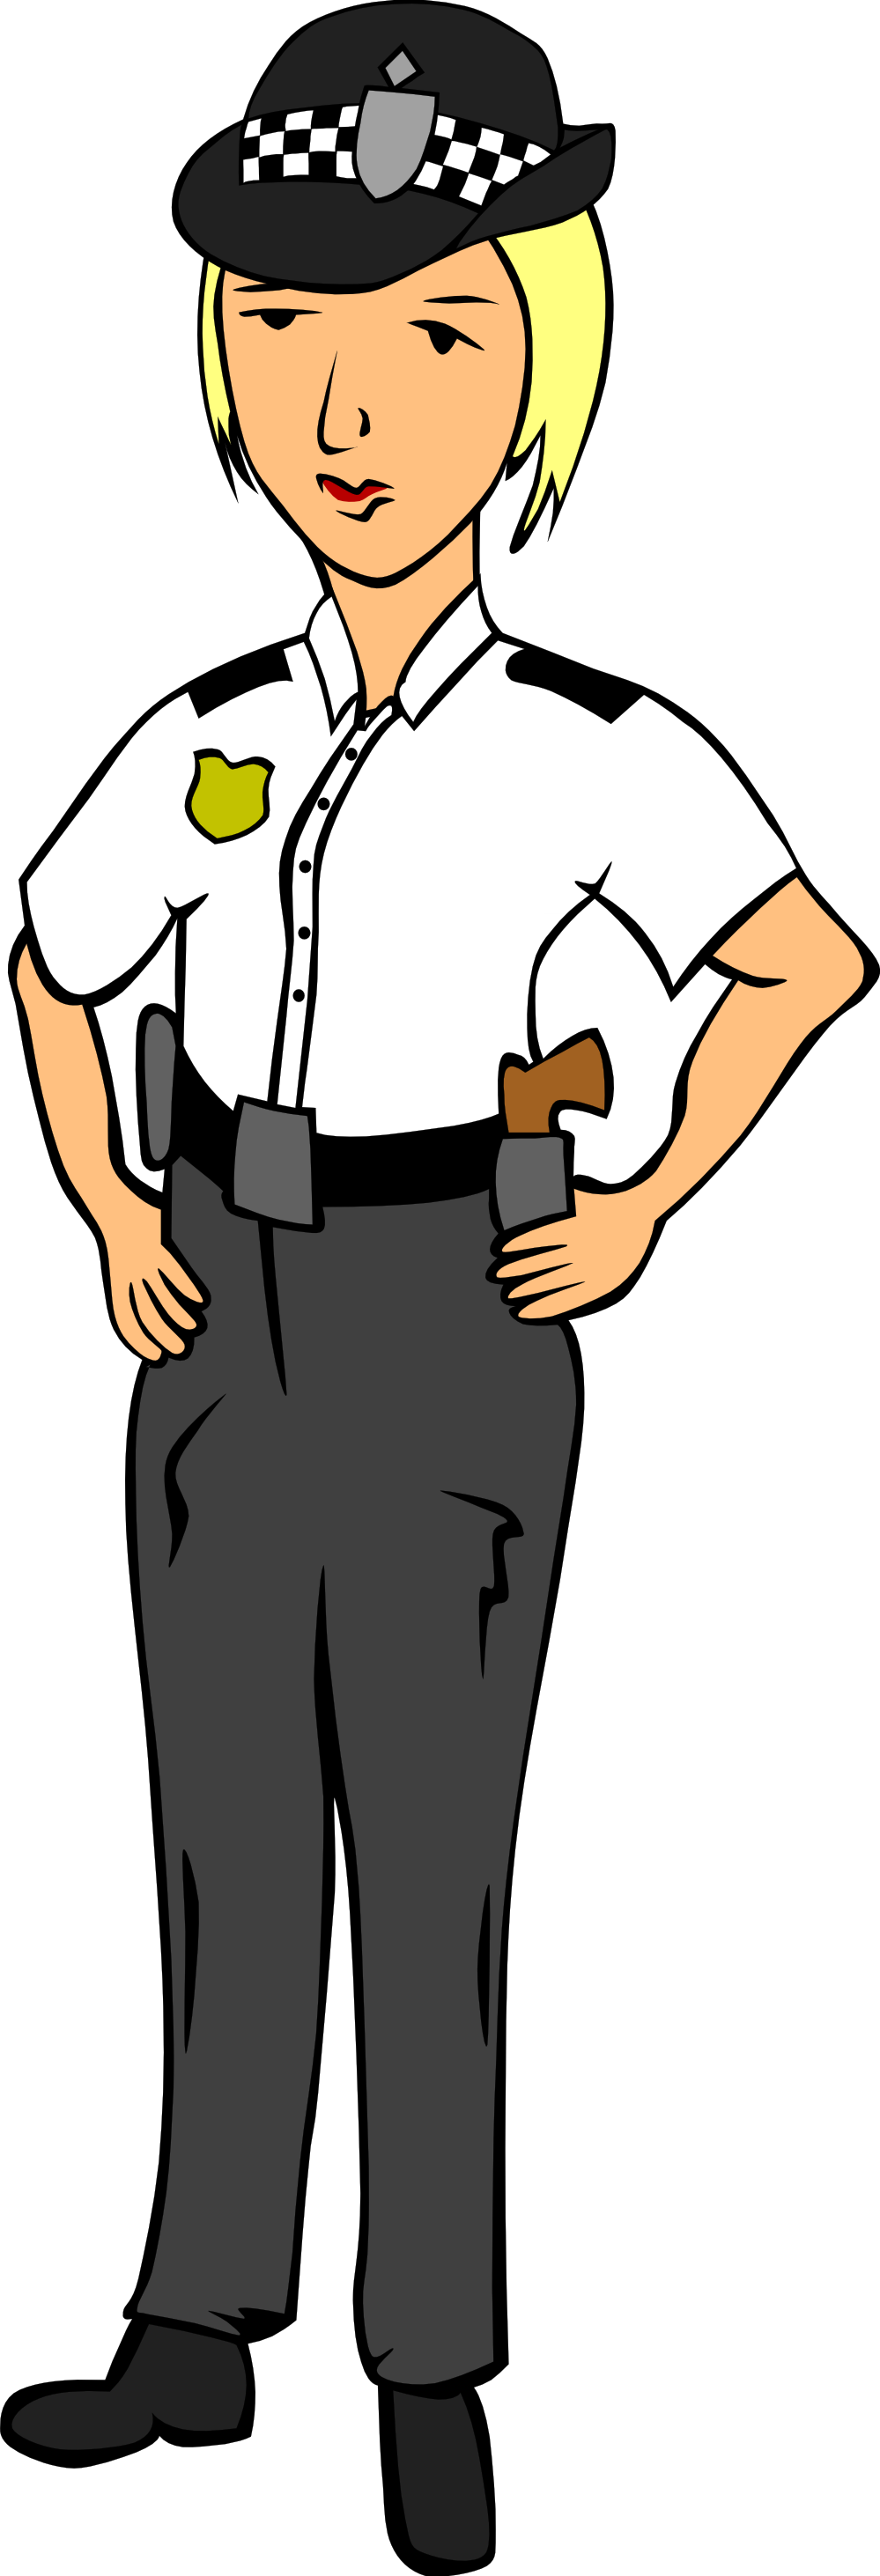 Police Officer Black And White Clipart